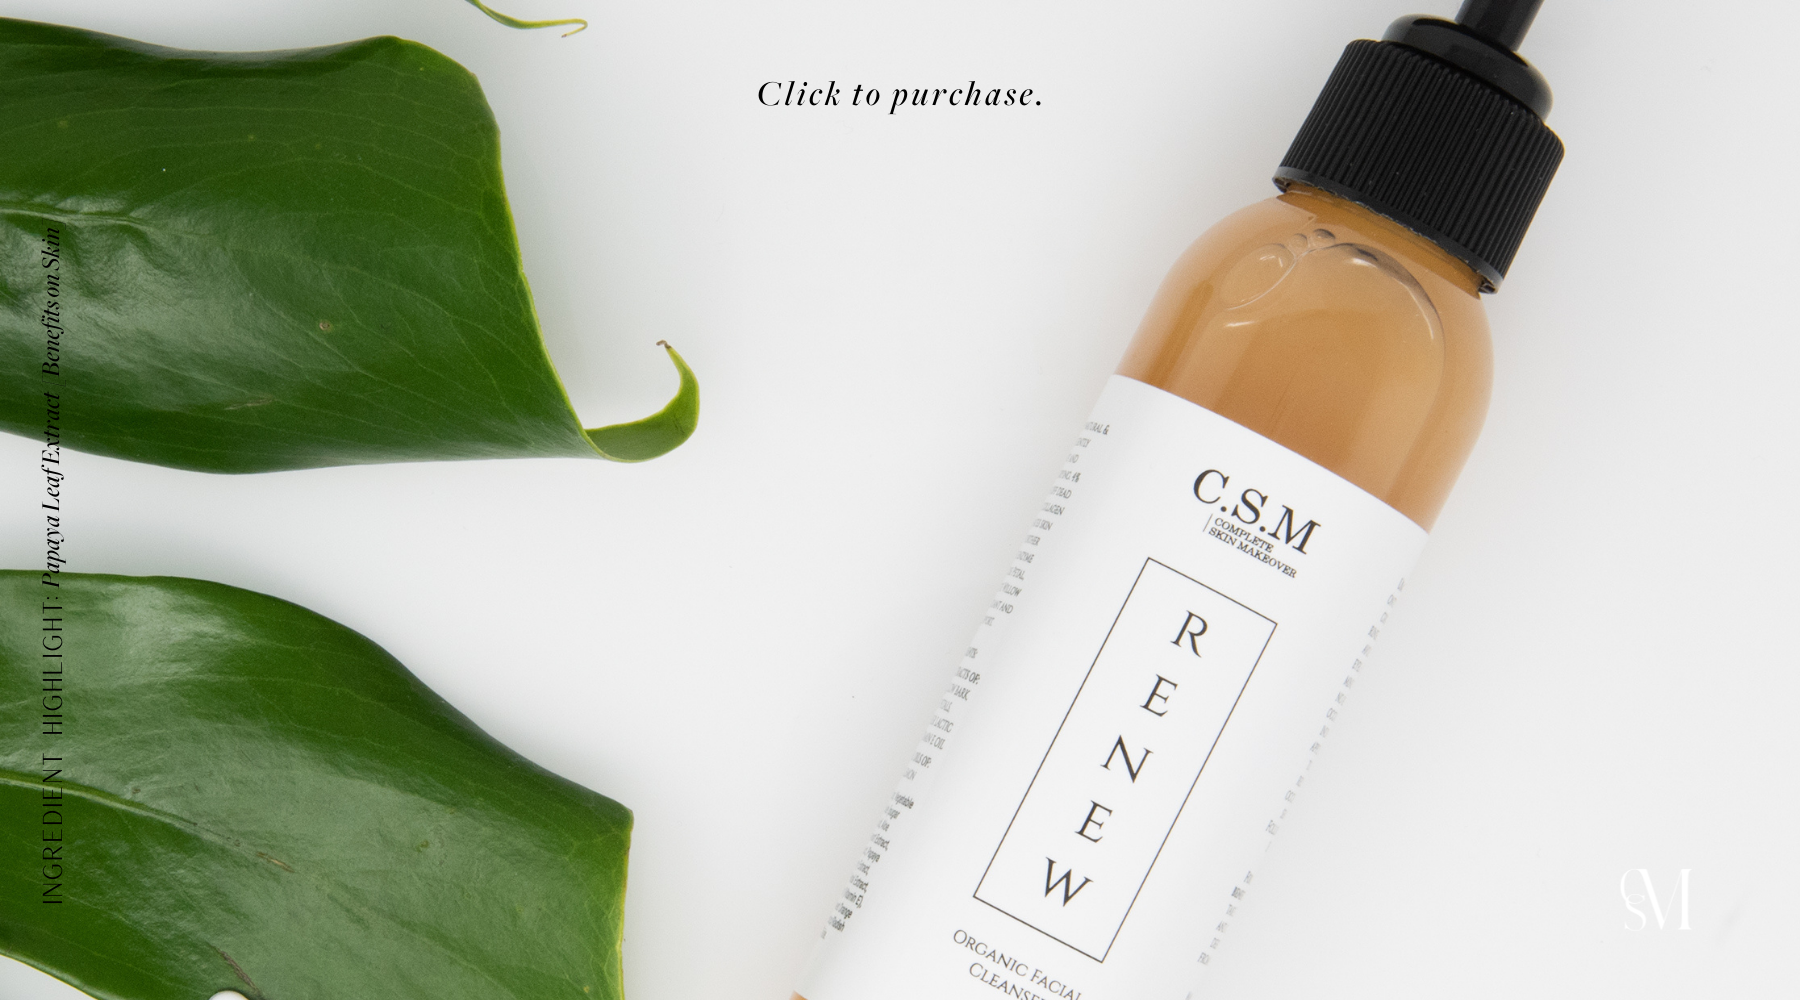 CSM Renew has the potent natural ingredient which is Papaya Leaf Extract.